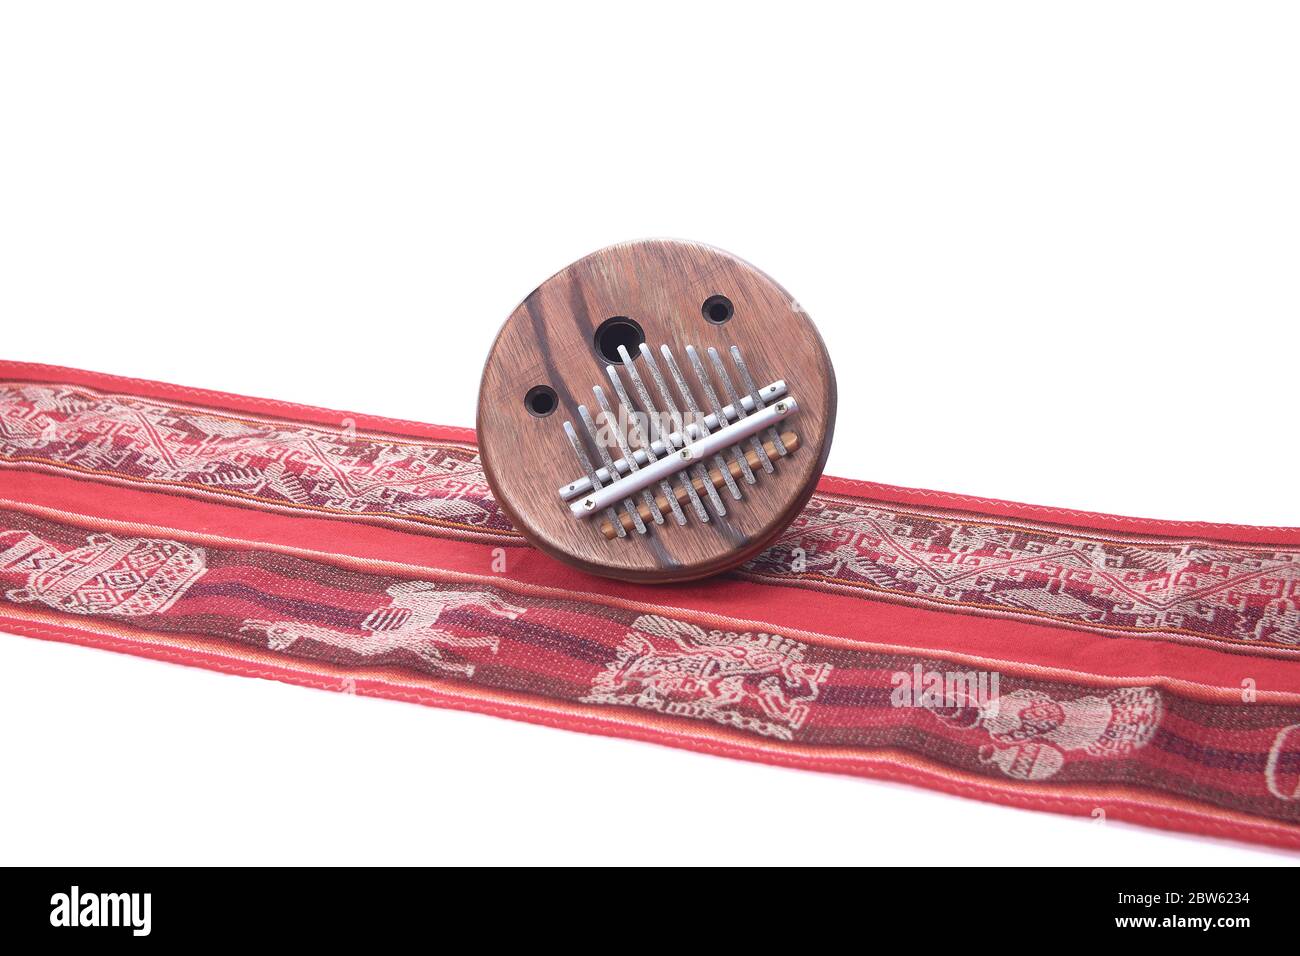 African folk music instrument kalimba on red cloth with white background Stock Photo